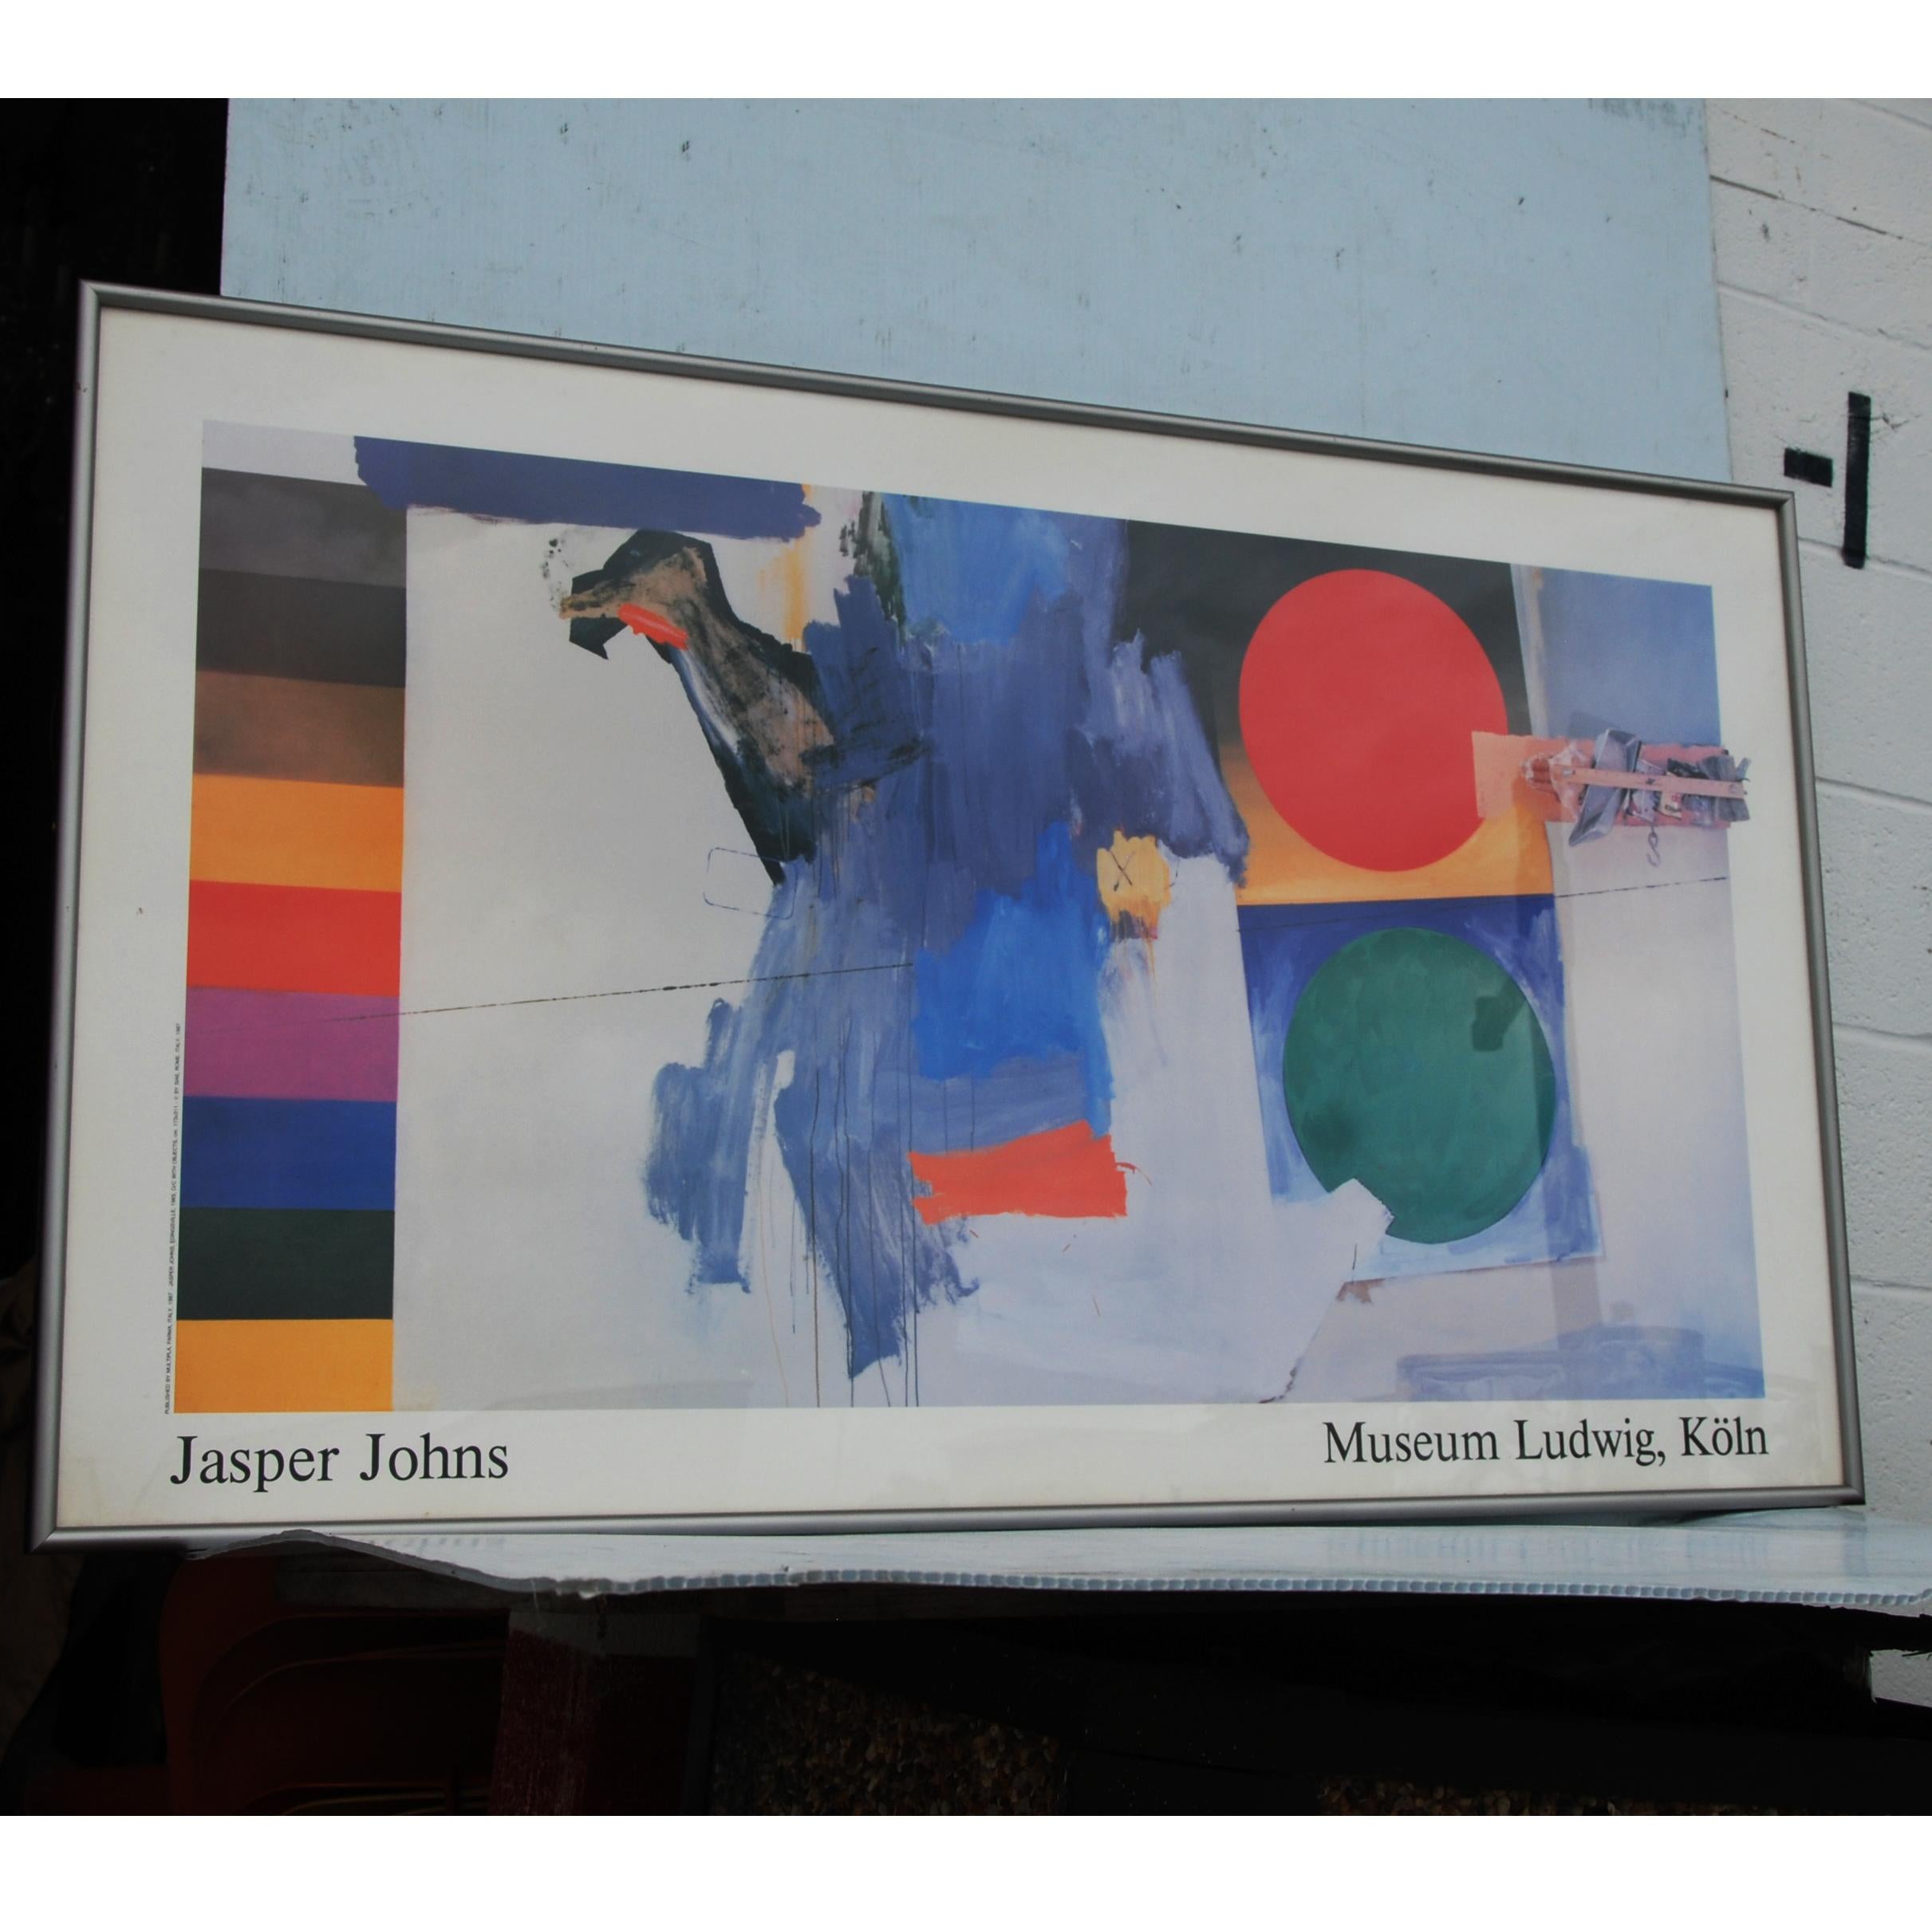 Jasper Johns
1930-
 
Poster from 1987 exhibition from the Museum Ludwig in Germany. Professionally framed.

Measures: Framed 32